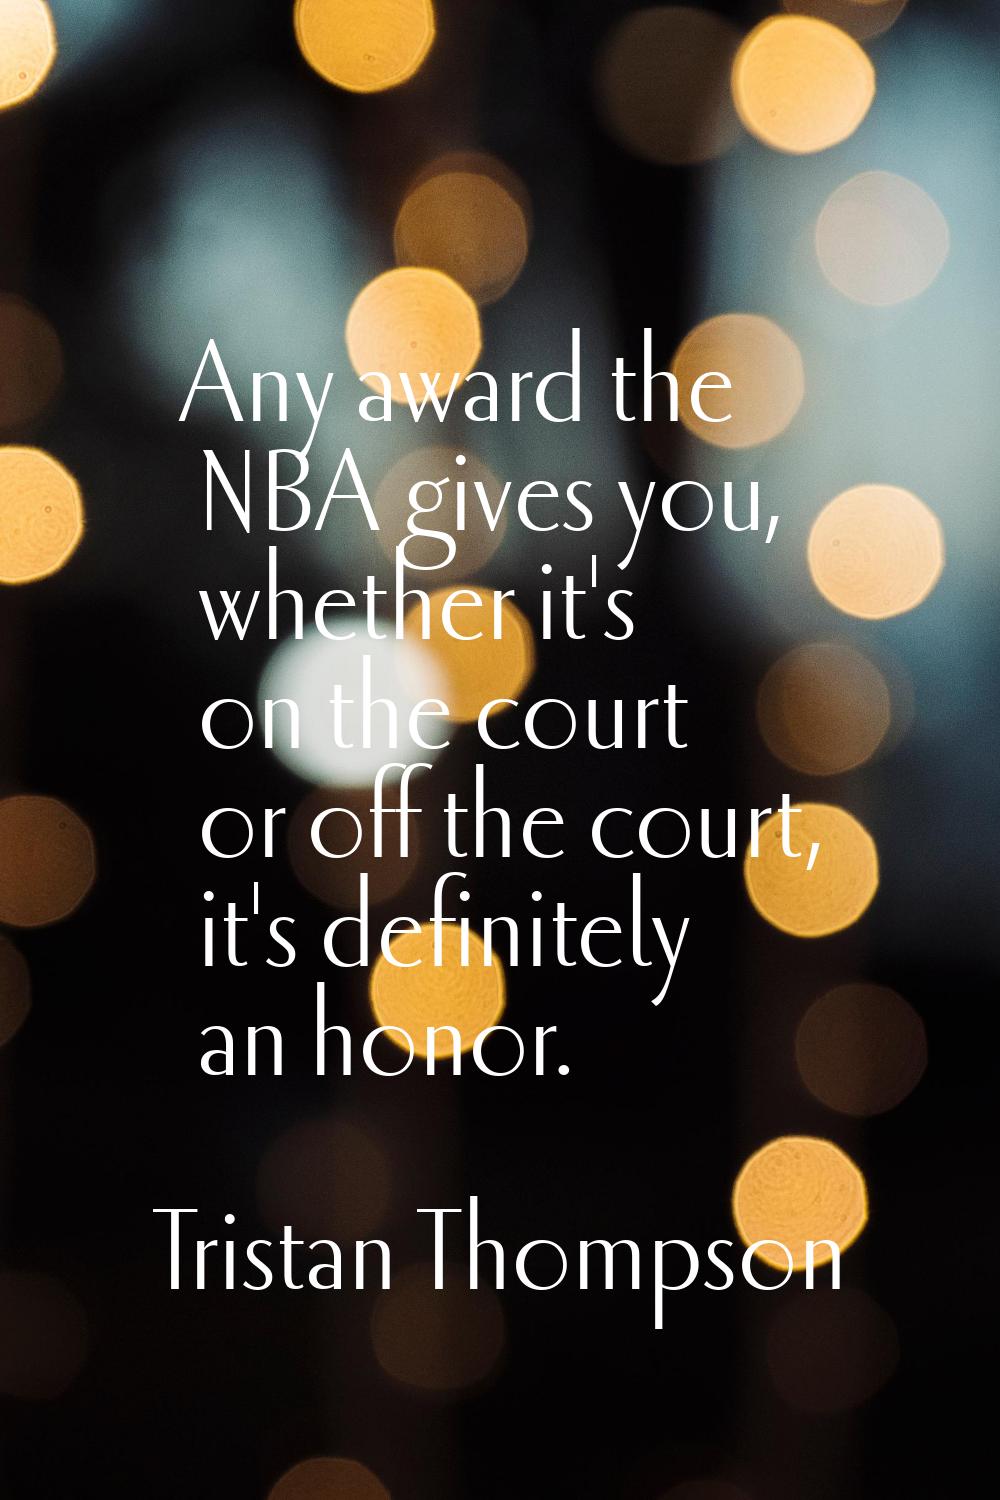 Any award the NBA gives you, whether it's on the court or off the court, it's definitely an honor.